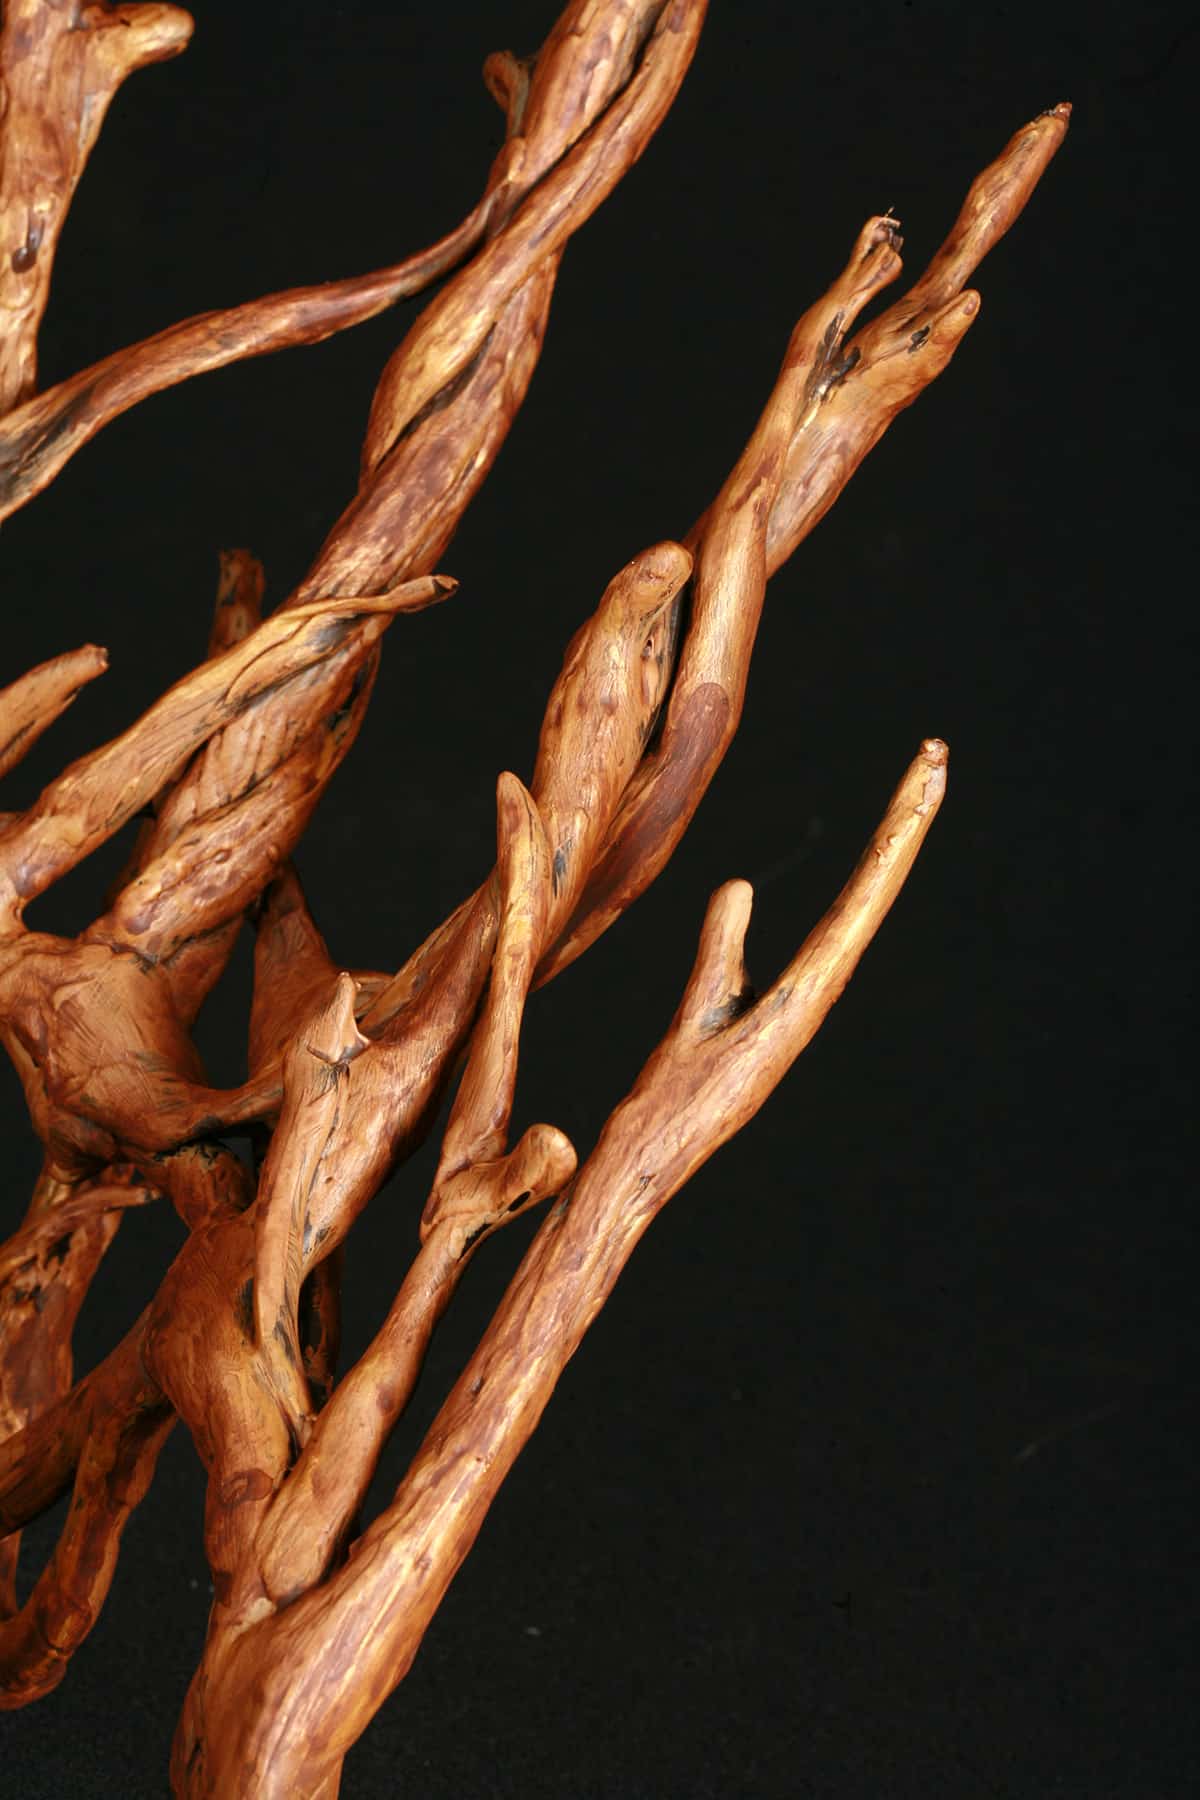 A plastic replica of a Thranduil crown - from The Hobbit -painted to look realistically like wooden twigs.